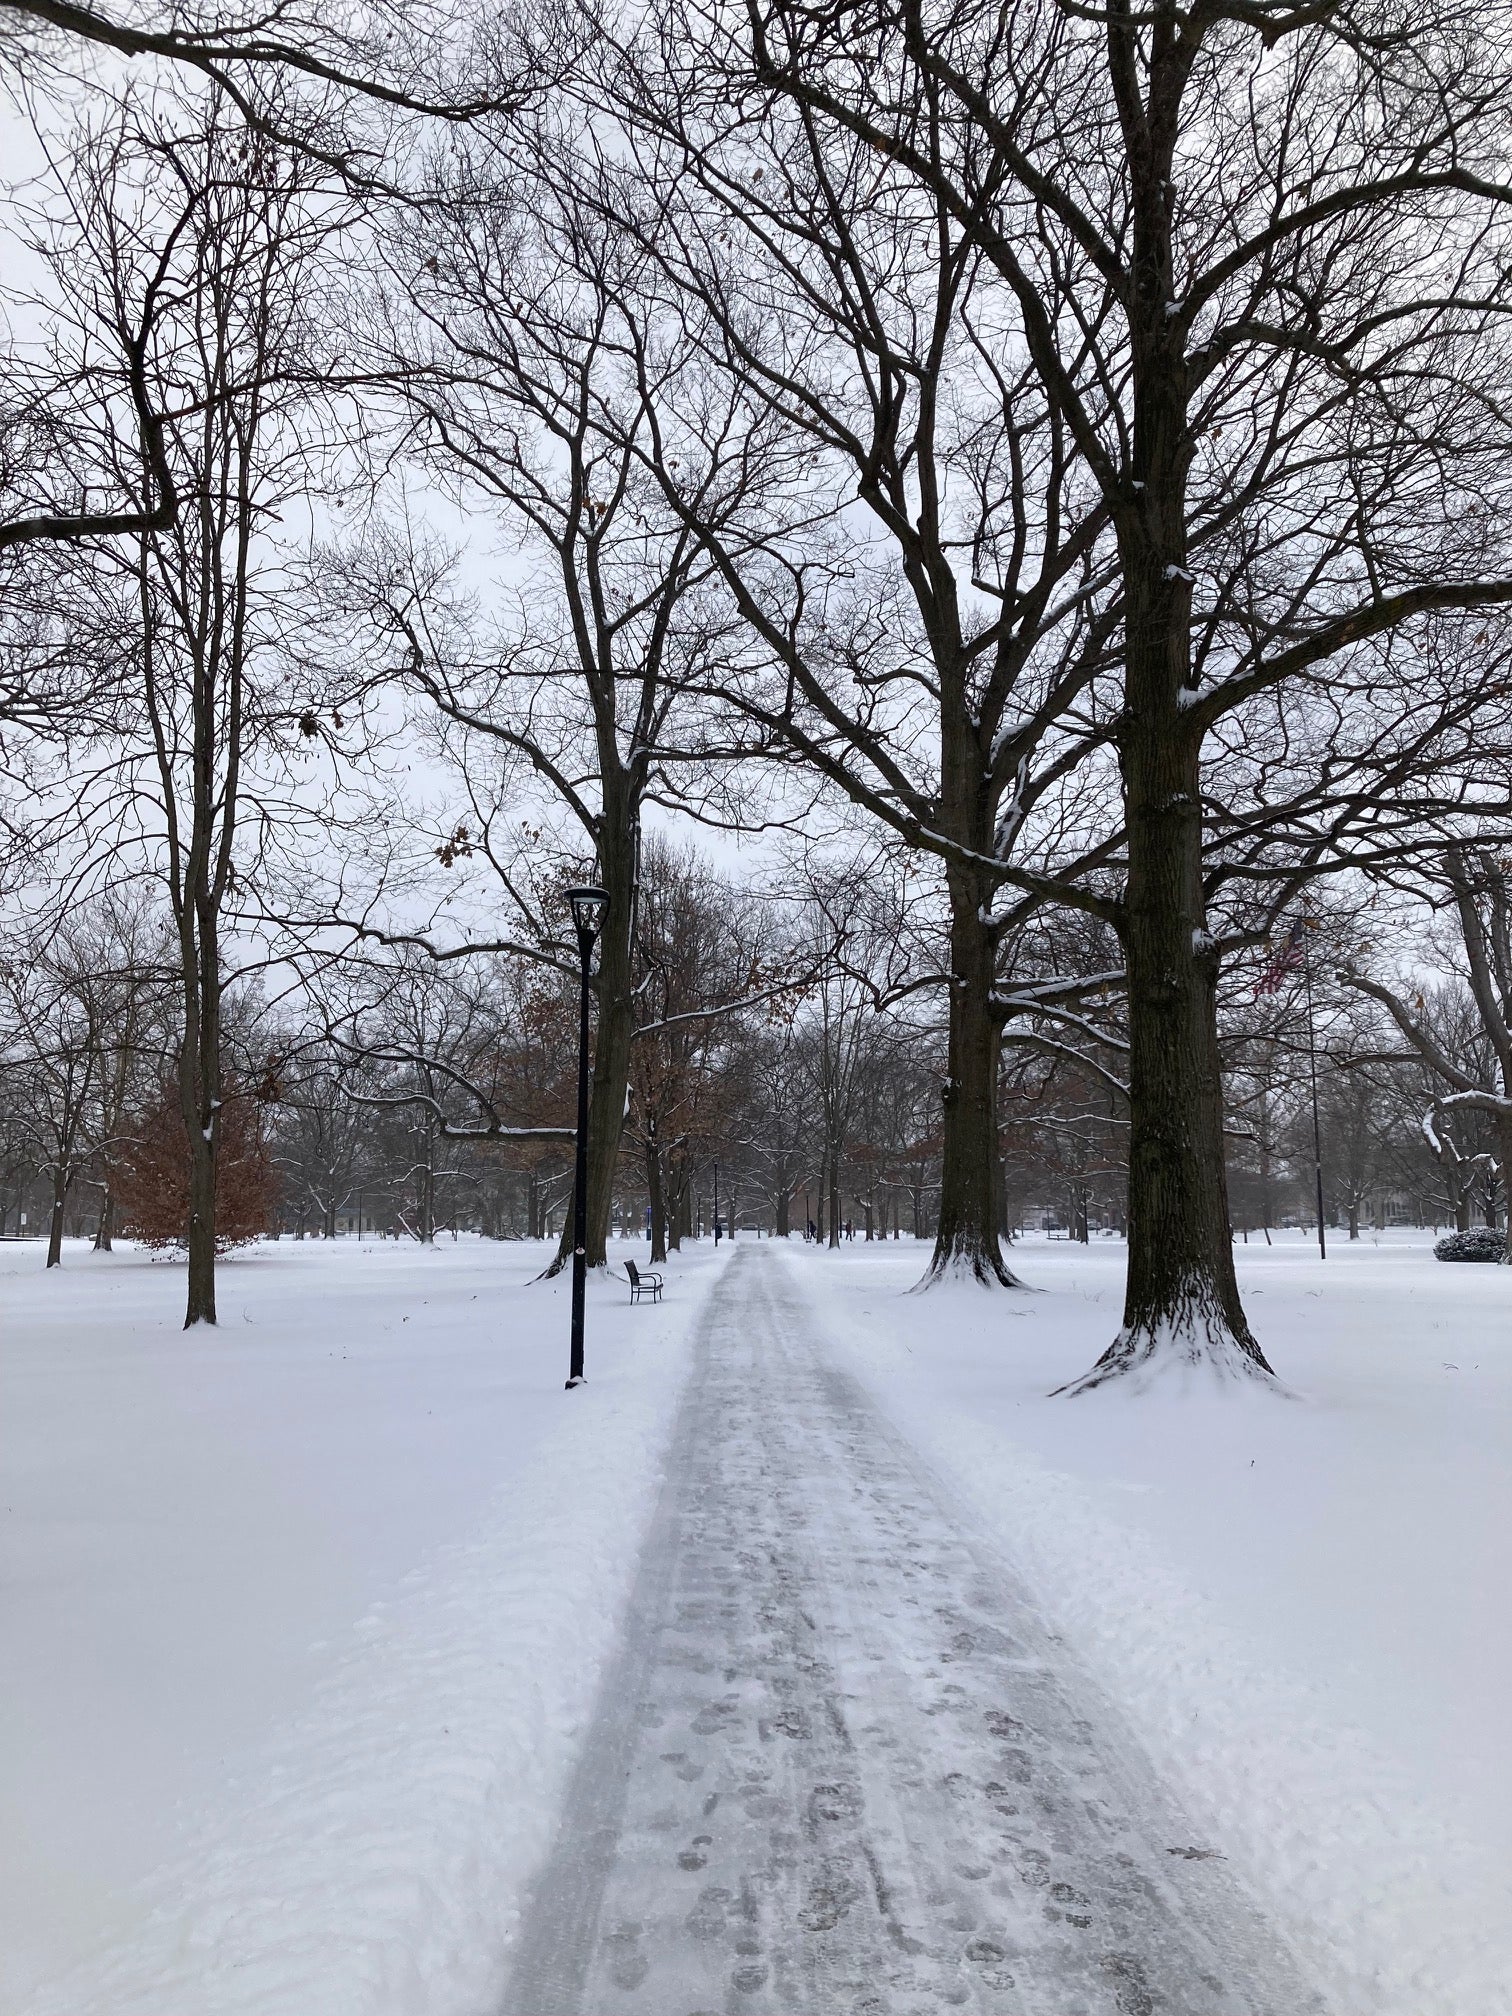 A view along a snowy path in Tappan Square.